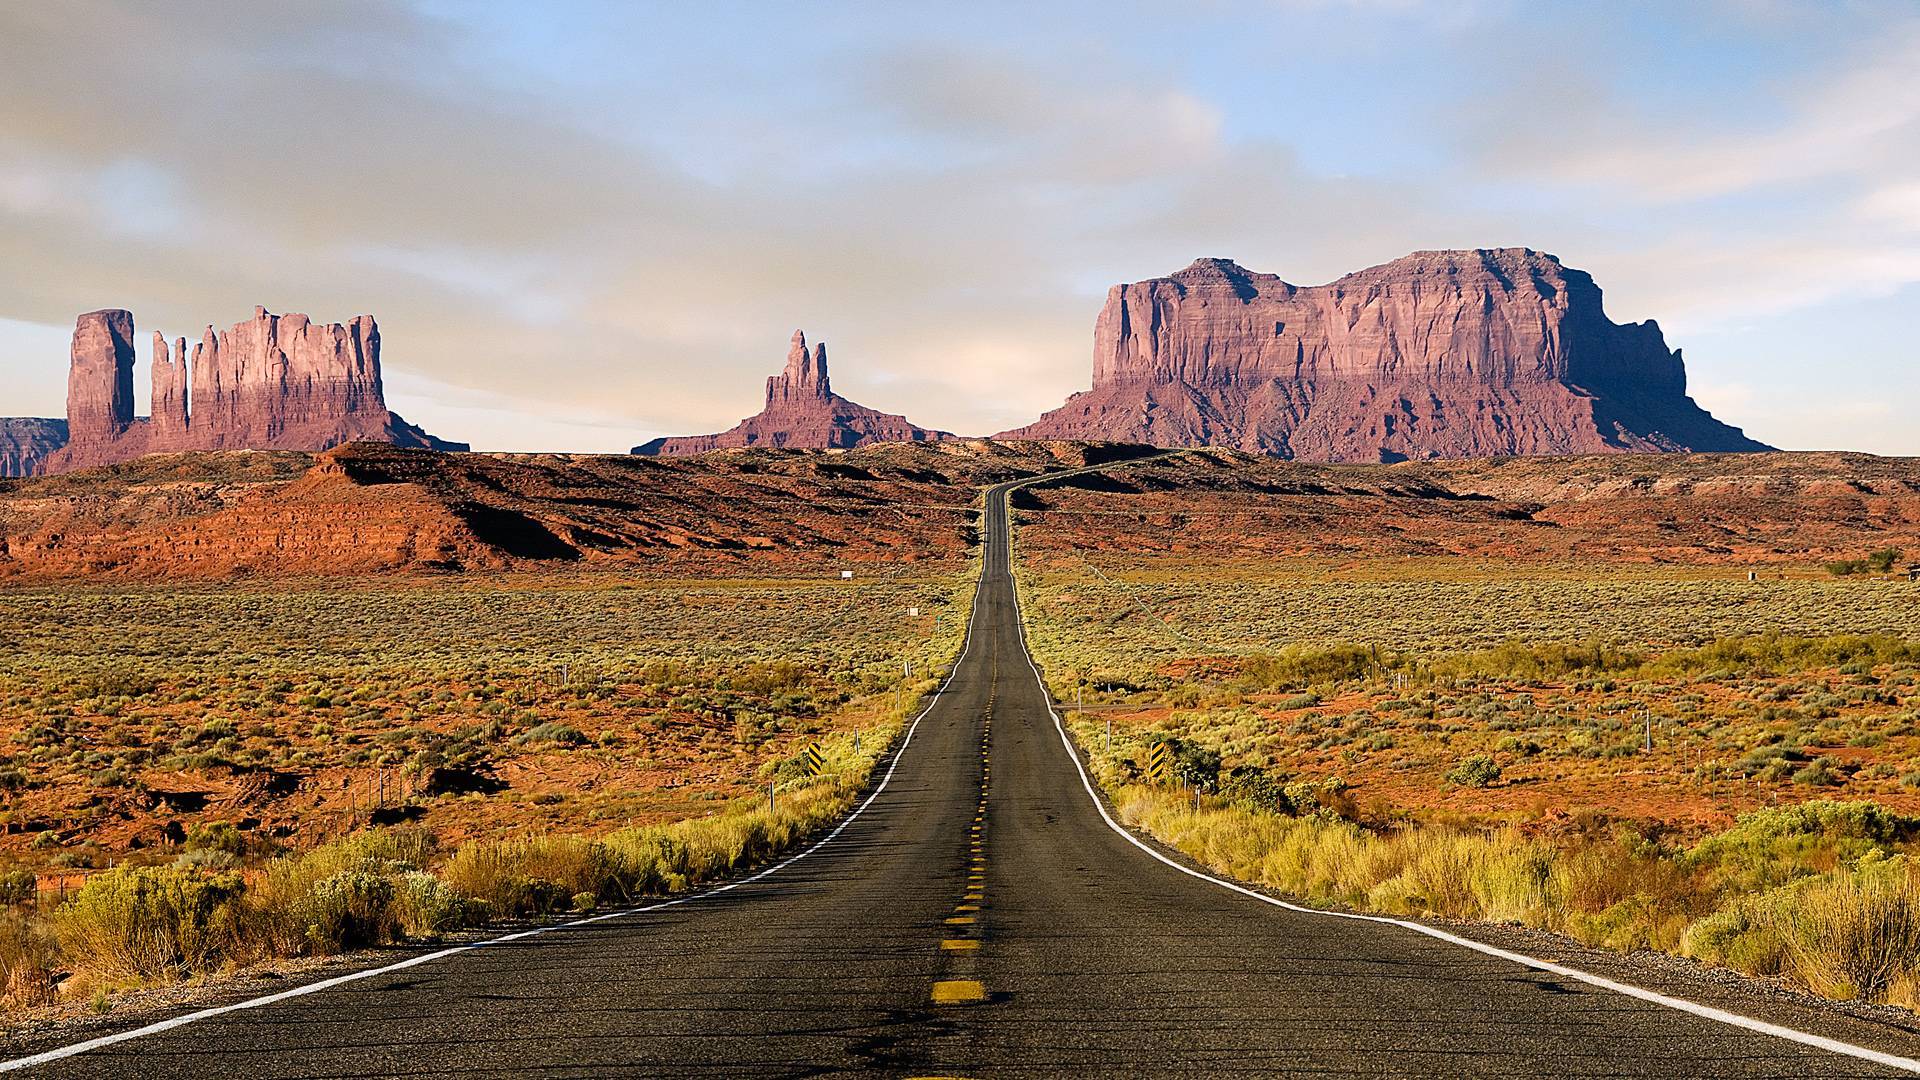 Route US 163 To Monument Valley, Utah, USA [1920x1080]